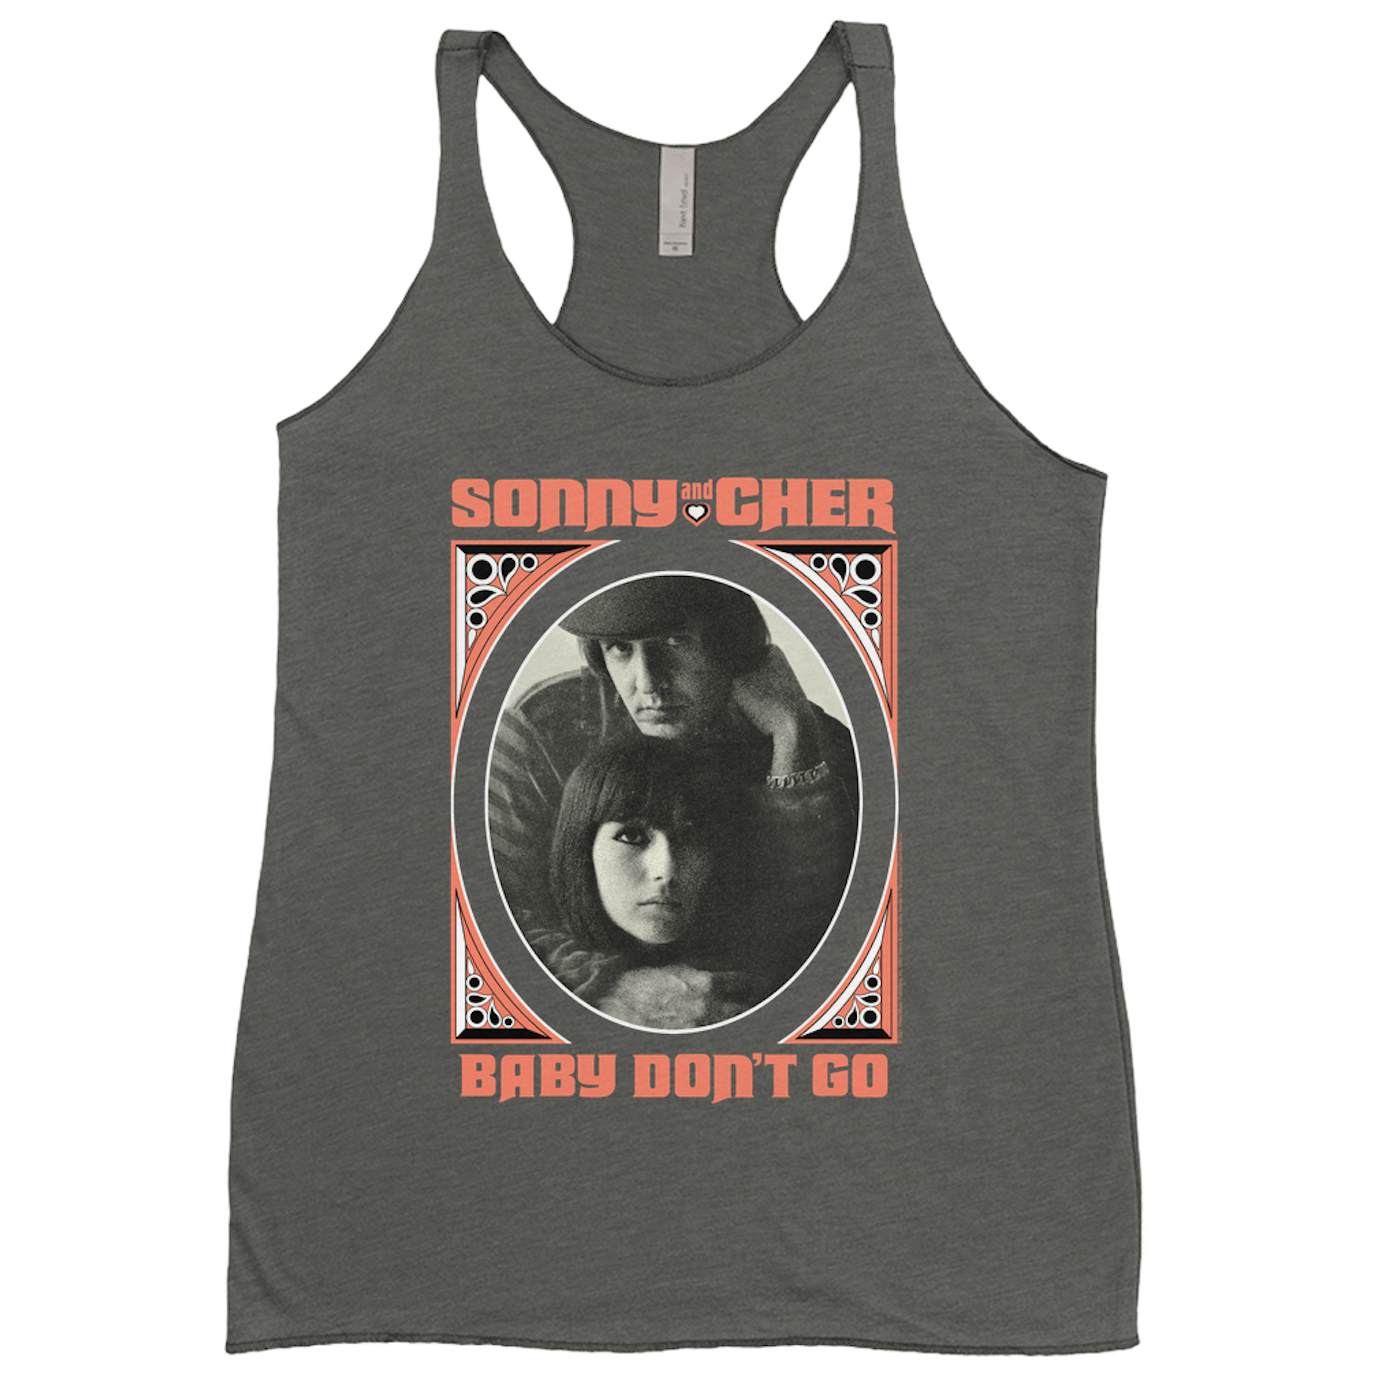 Sonny & Cher Ladies' Tank Top | Baby Don't Go Retro Frame Image Sonny and Cher Shirt (Merchbar Exclusive)